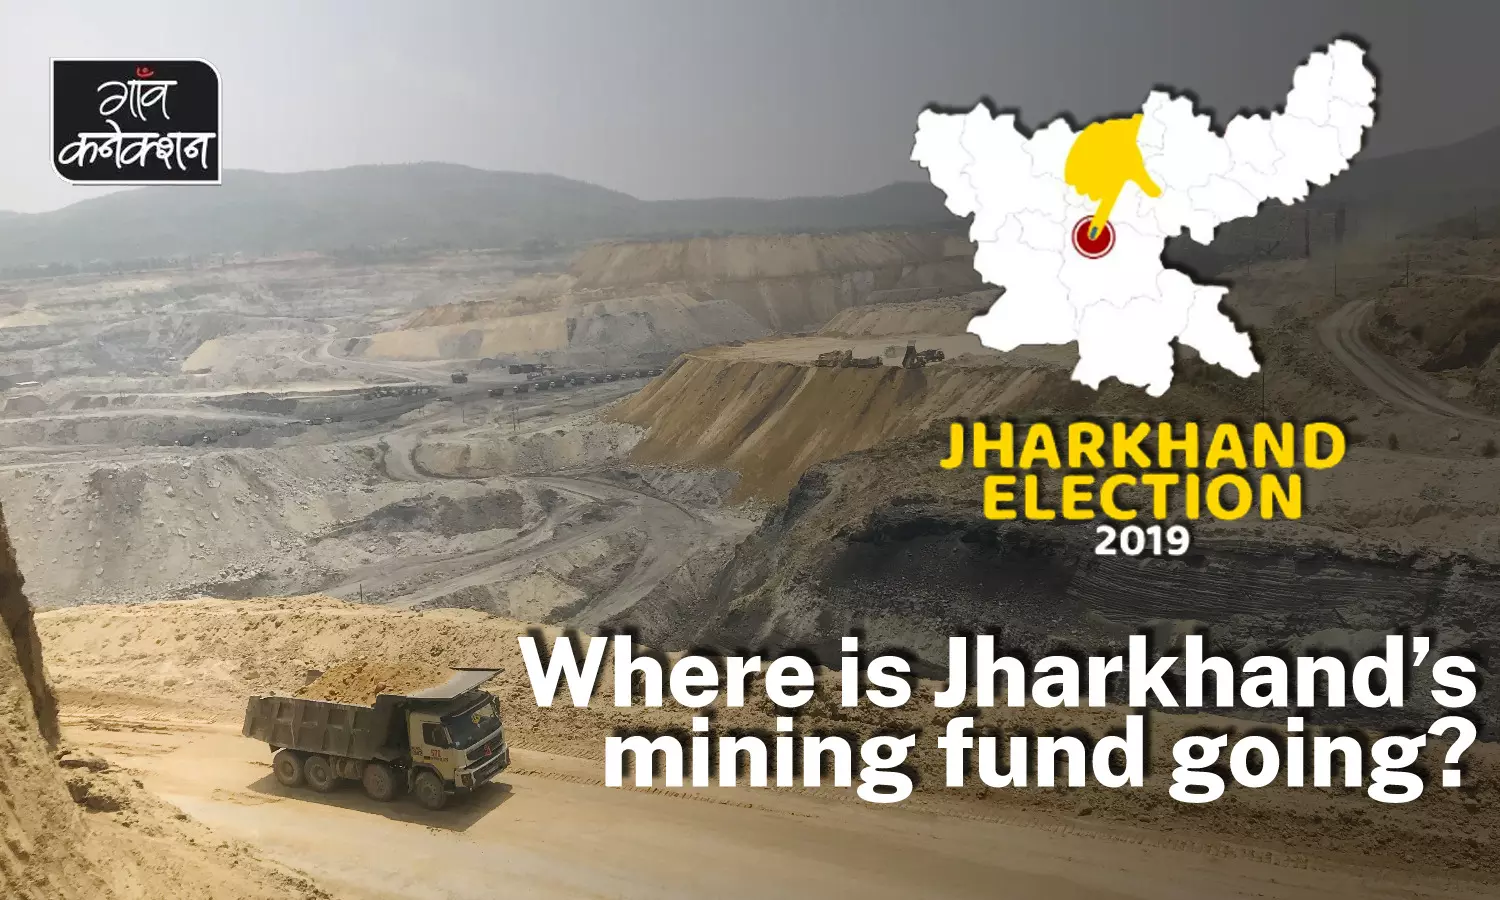 Jharkhand has Rs 4,718 crore fund for mining-affected communities. But, more than half the money is unspent.